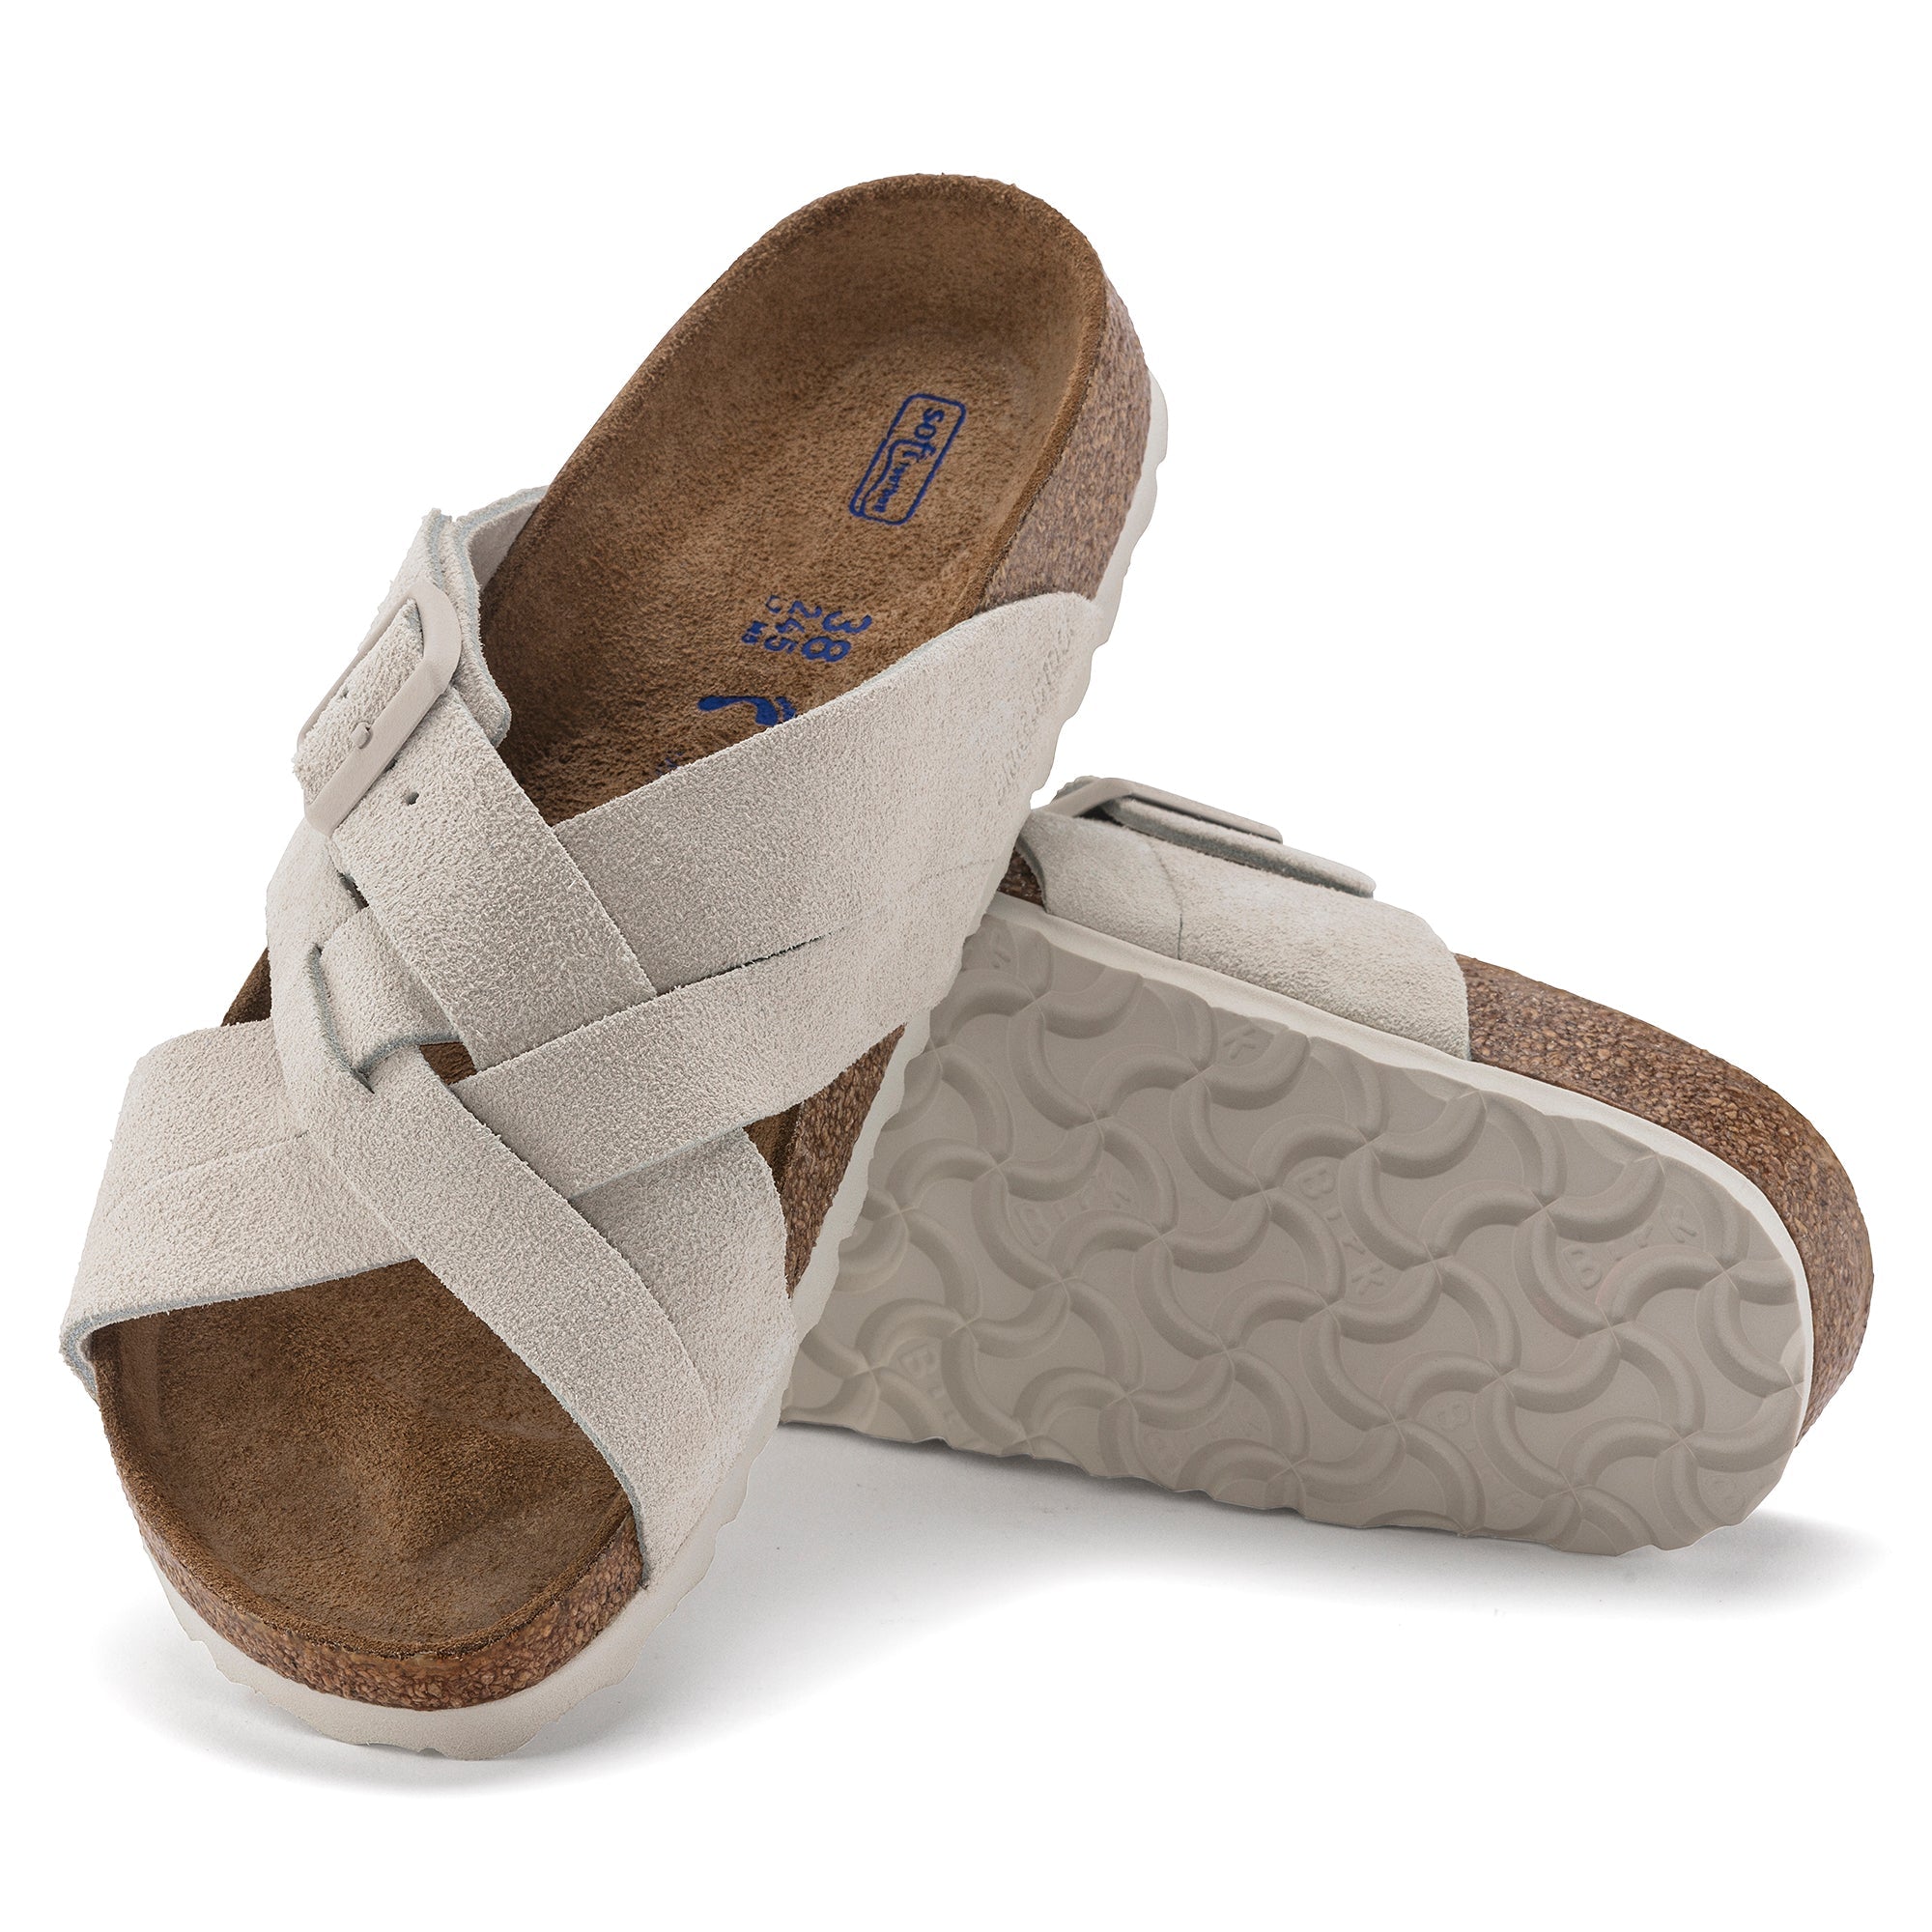 Birkenstock Lugano Soft Footbed Suede Leather Women's